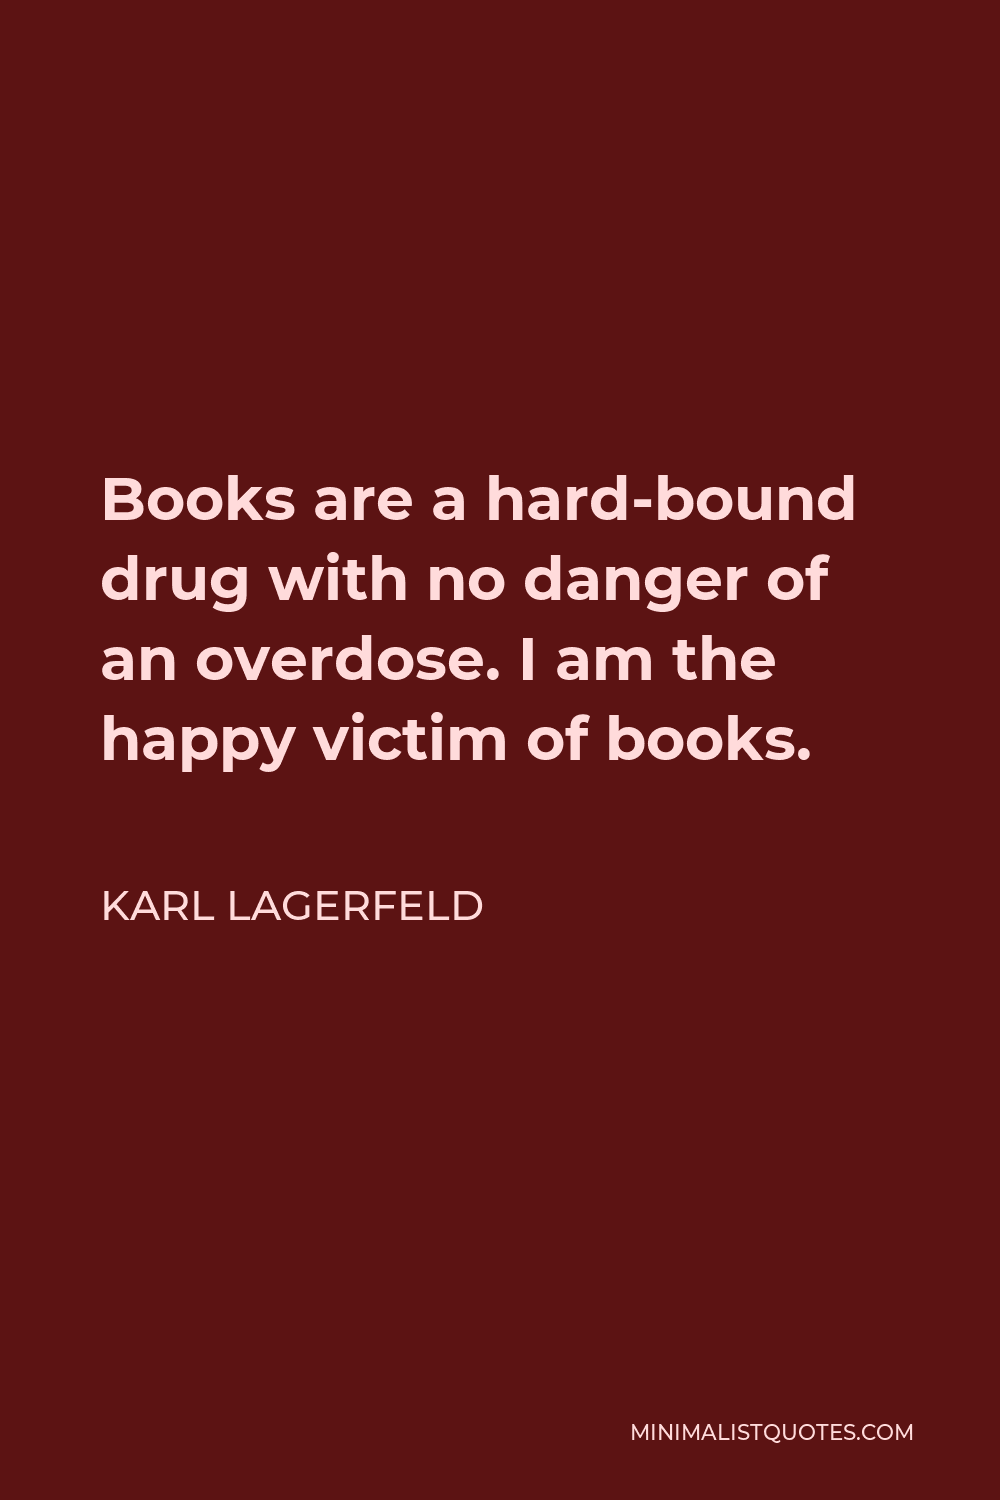 Karl Lagerfeld Quote - Books are a hard-bound drug with no danger of an overdose. I am the happy victim of books.